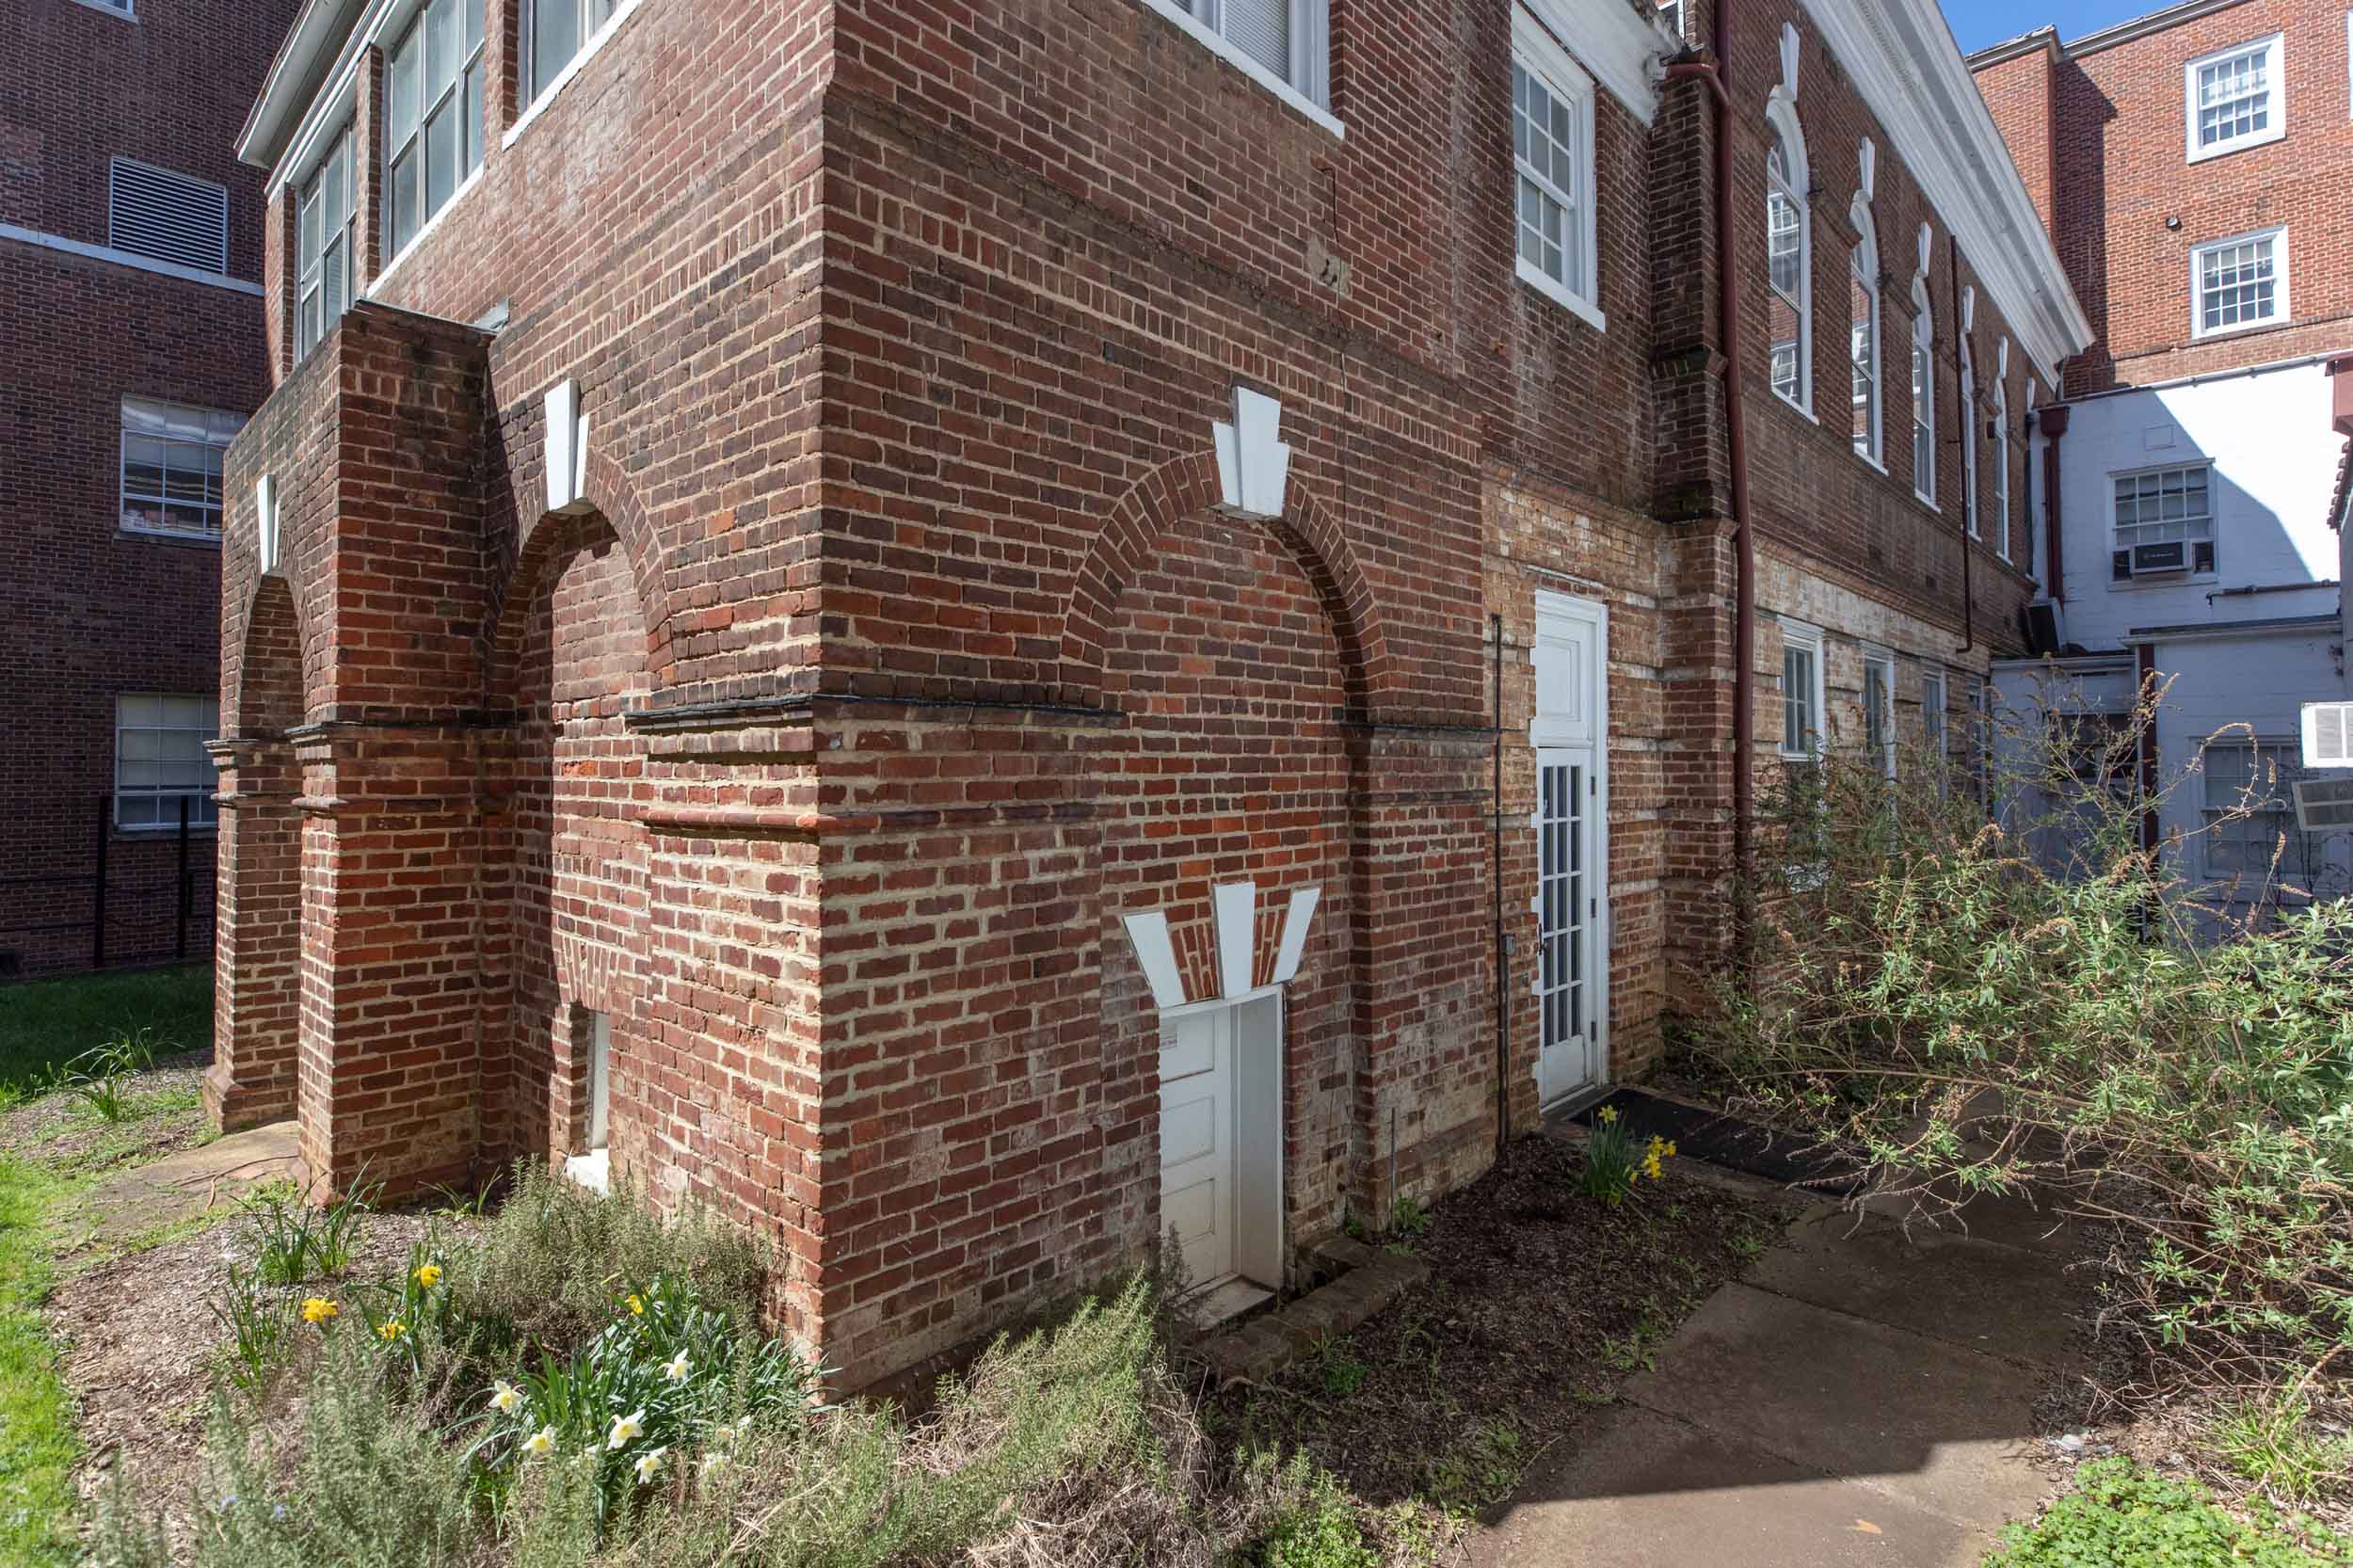 Brick building on Grounds